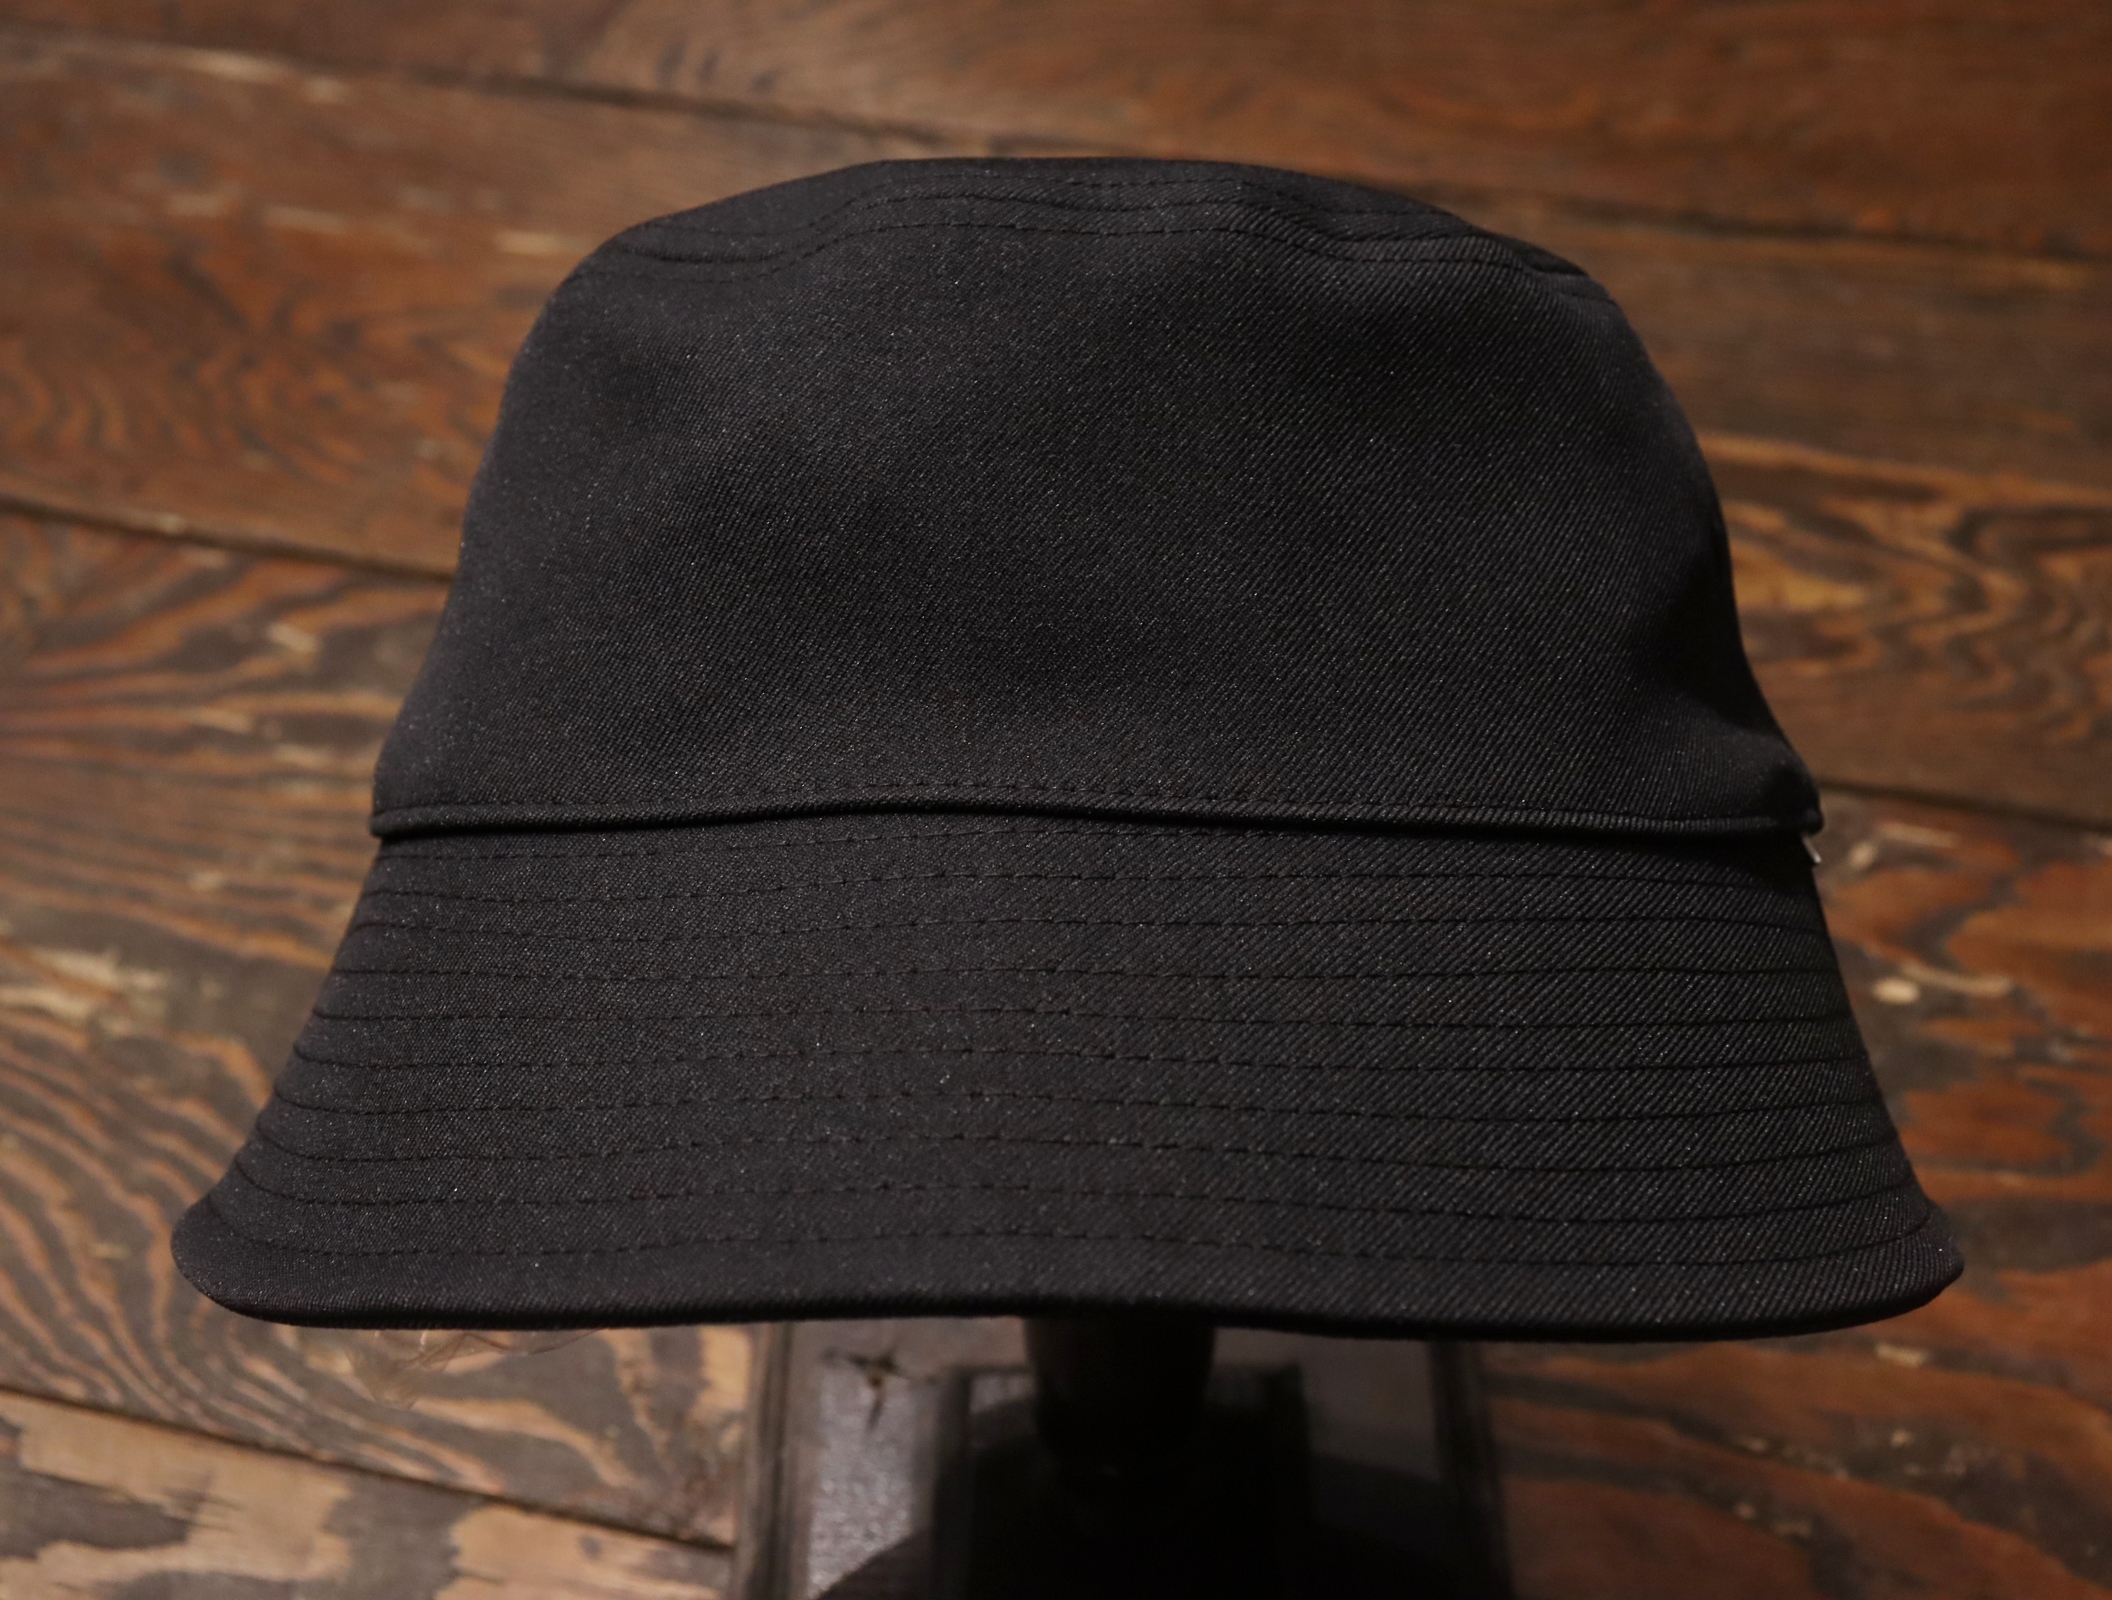 COOTIE 「 Polyester Twill Bucket Hat 」 バケットハット MASH UP 